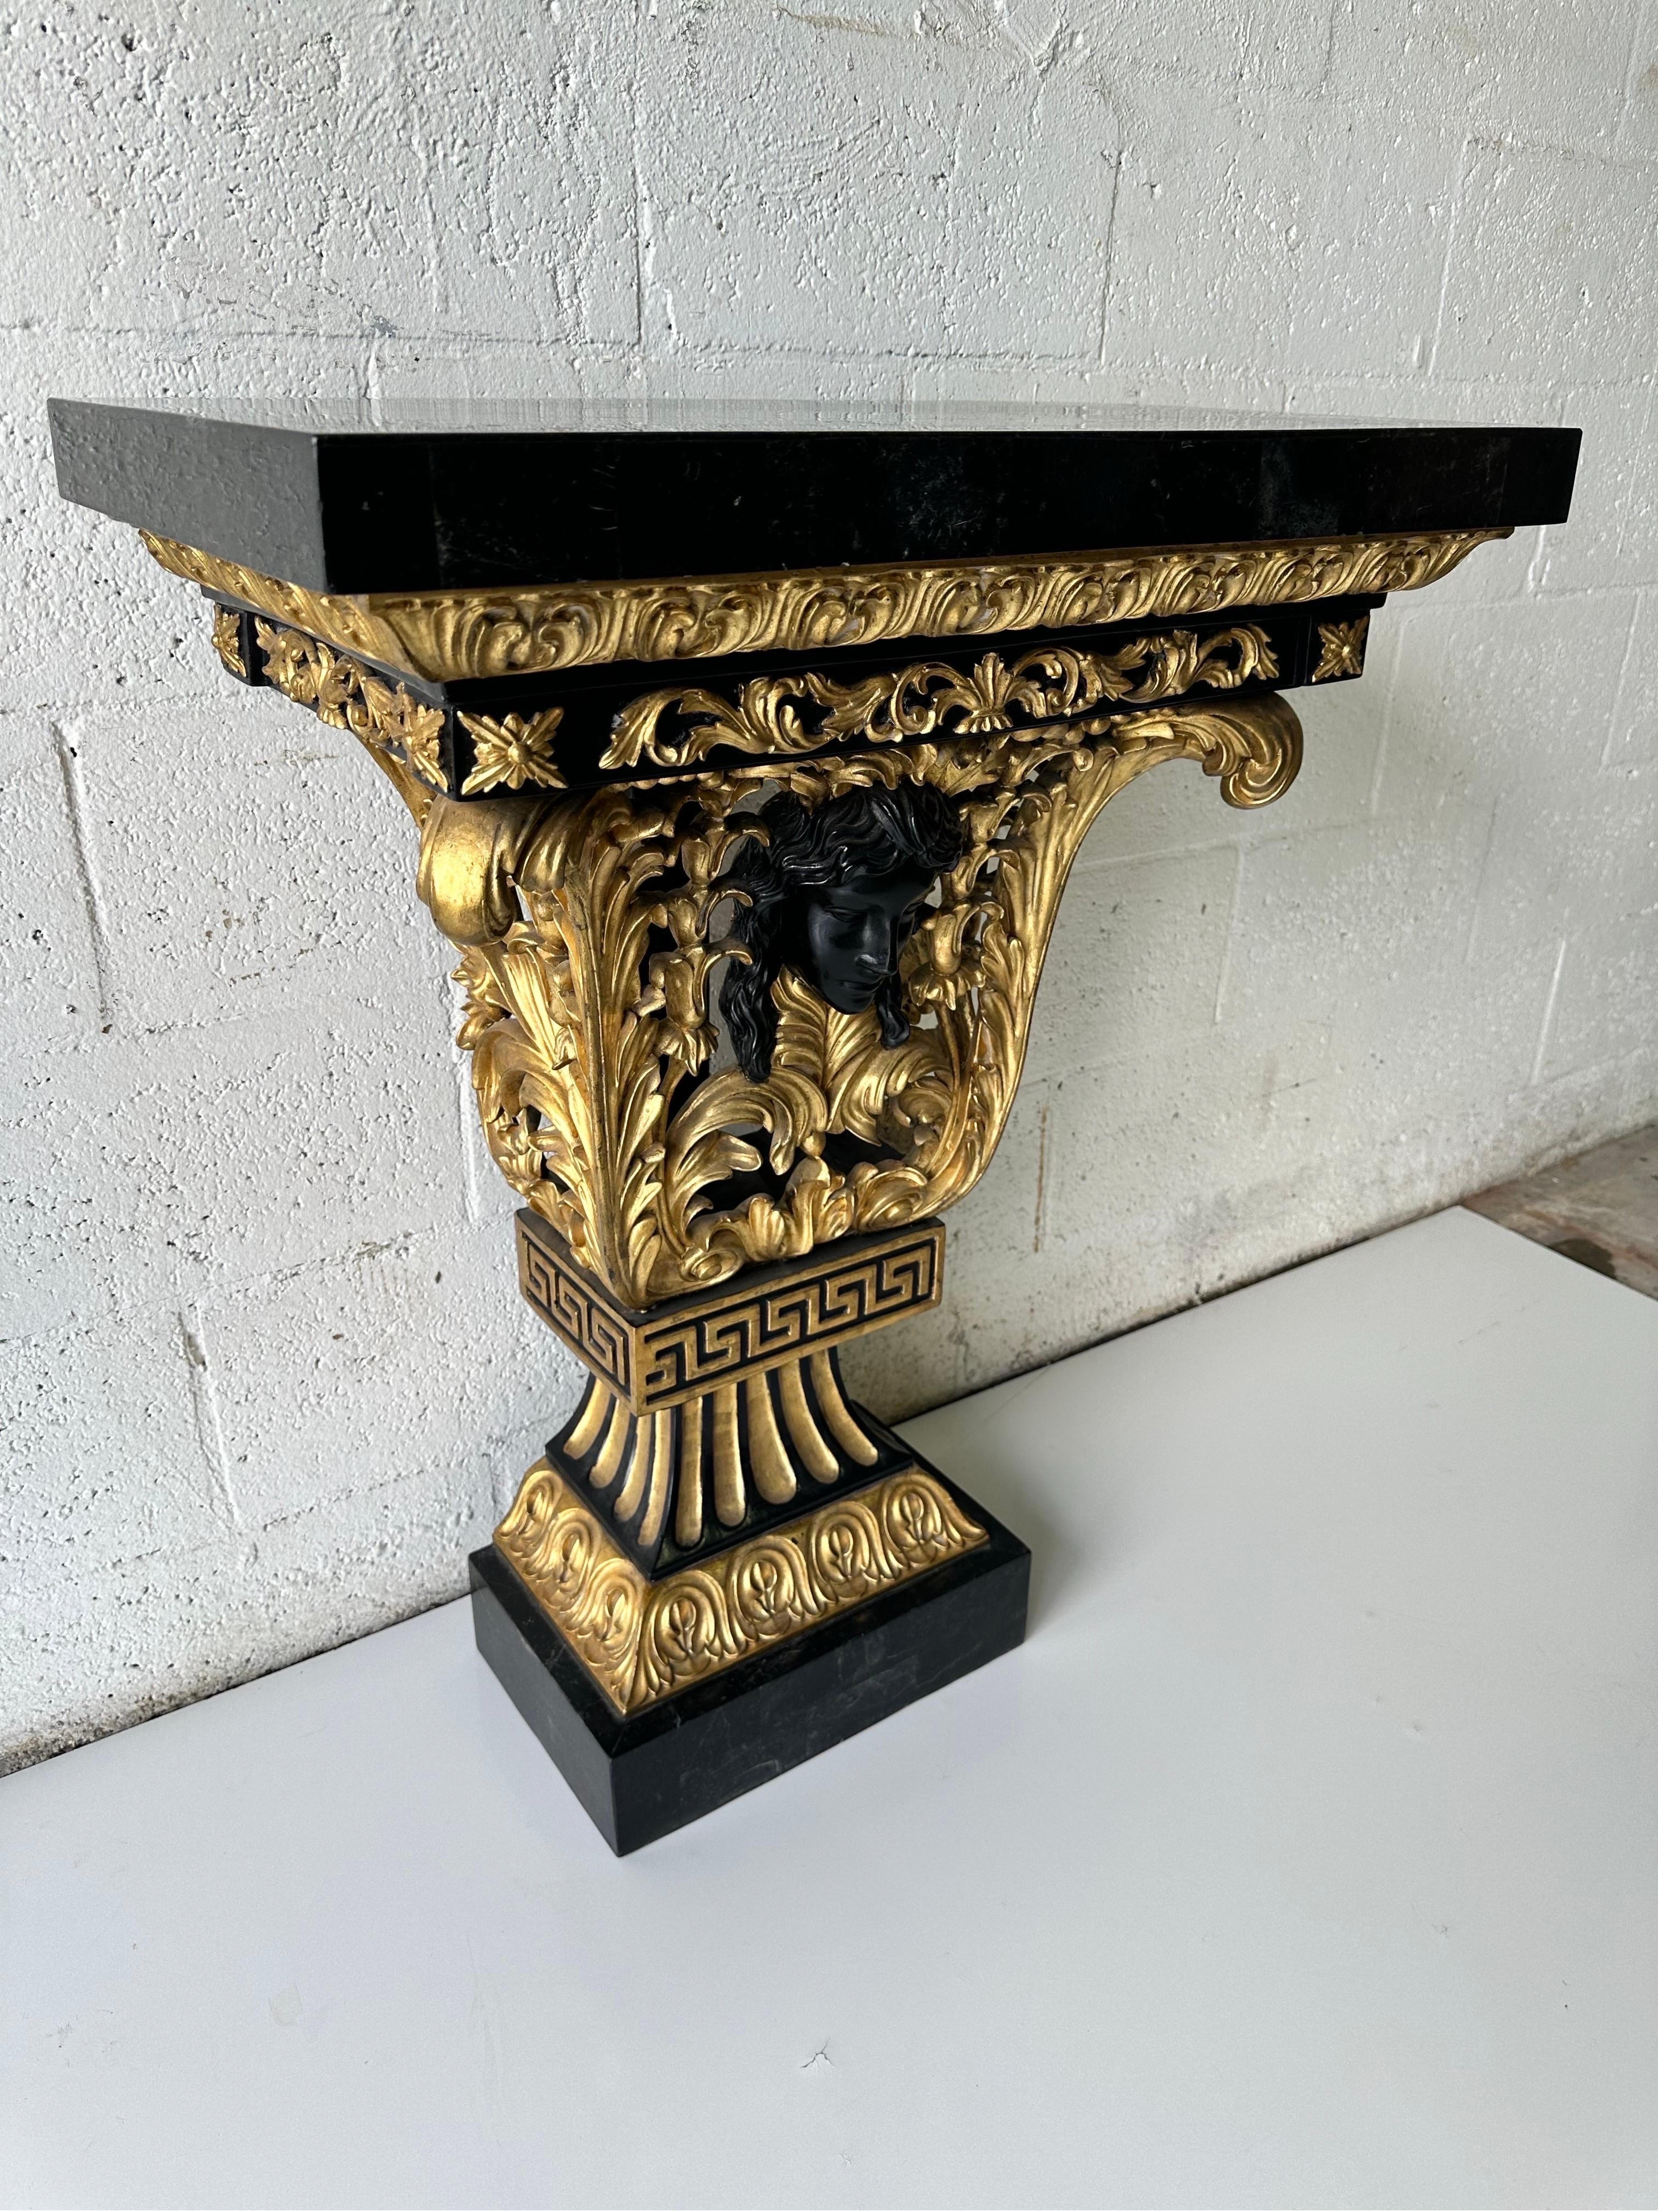 Elegant and impressive Italian marble and gilded wood console .
